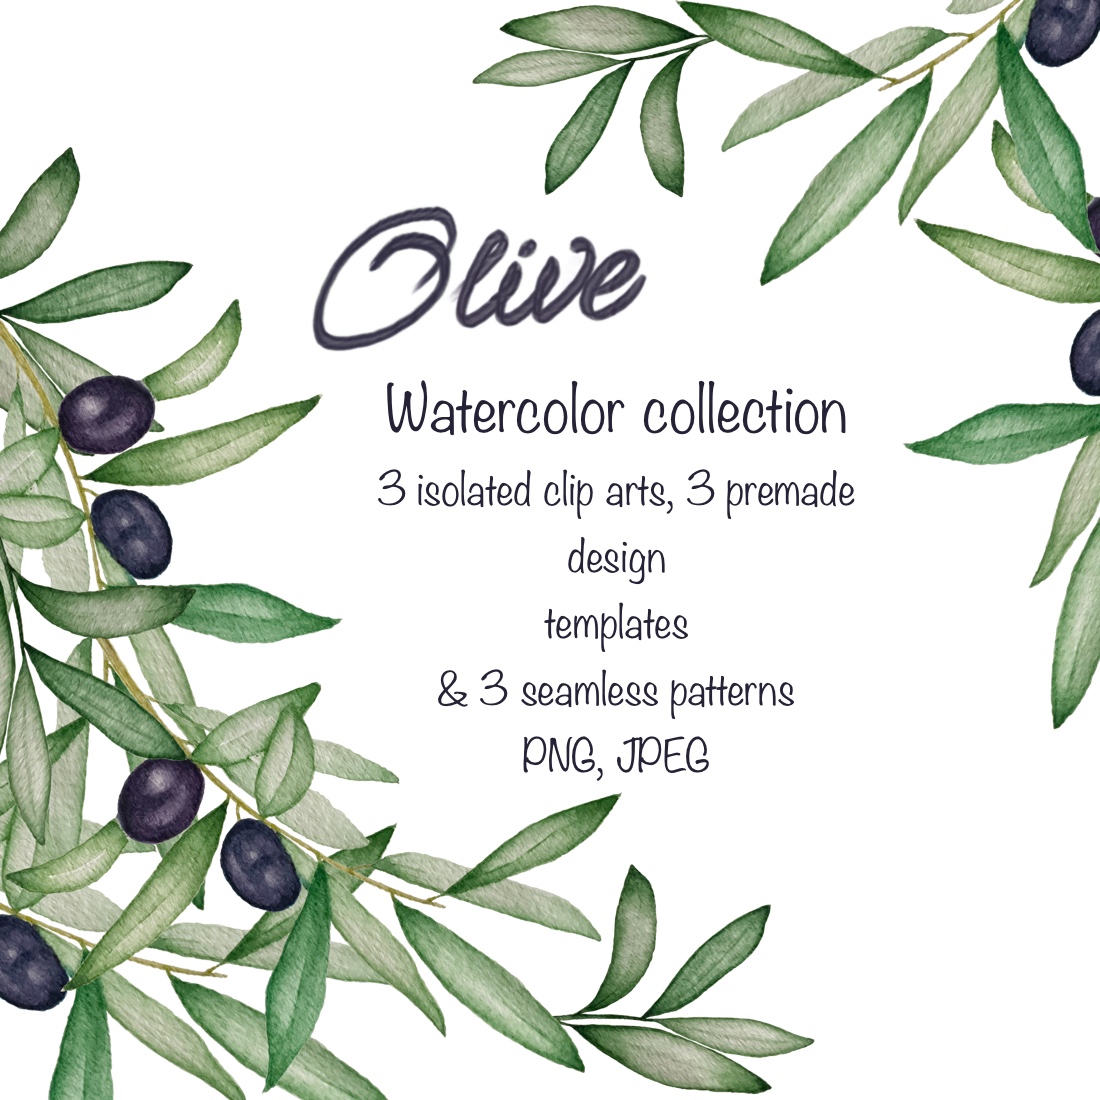 Hand painted watercolor collection of olive branches cover image.